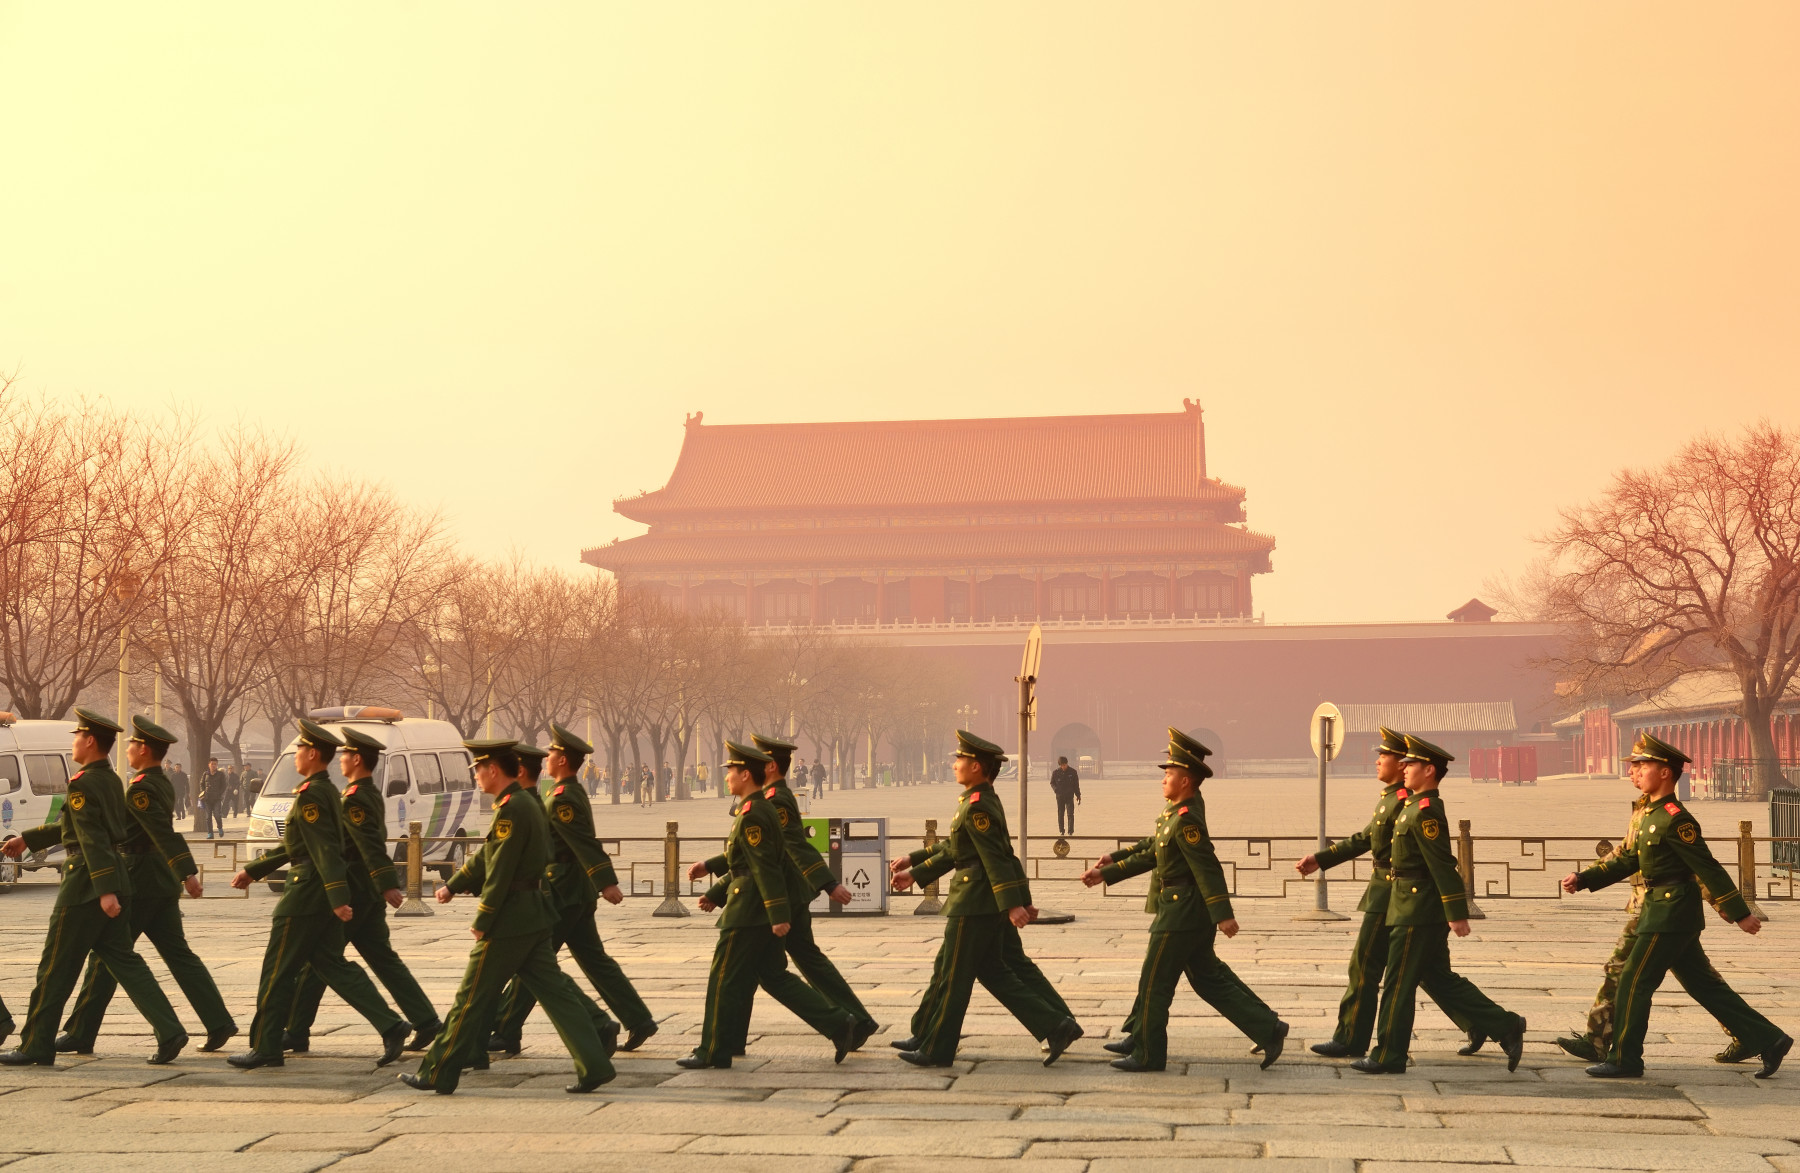 BEIJING, CHINA - APR 1: Team of soldier walk by Tiananmen in the morning on April 1, 2013 in Beijing, China. It is a famous monument in Beijing and serves as a national symbol.